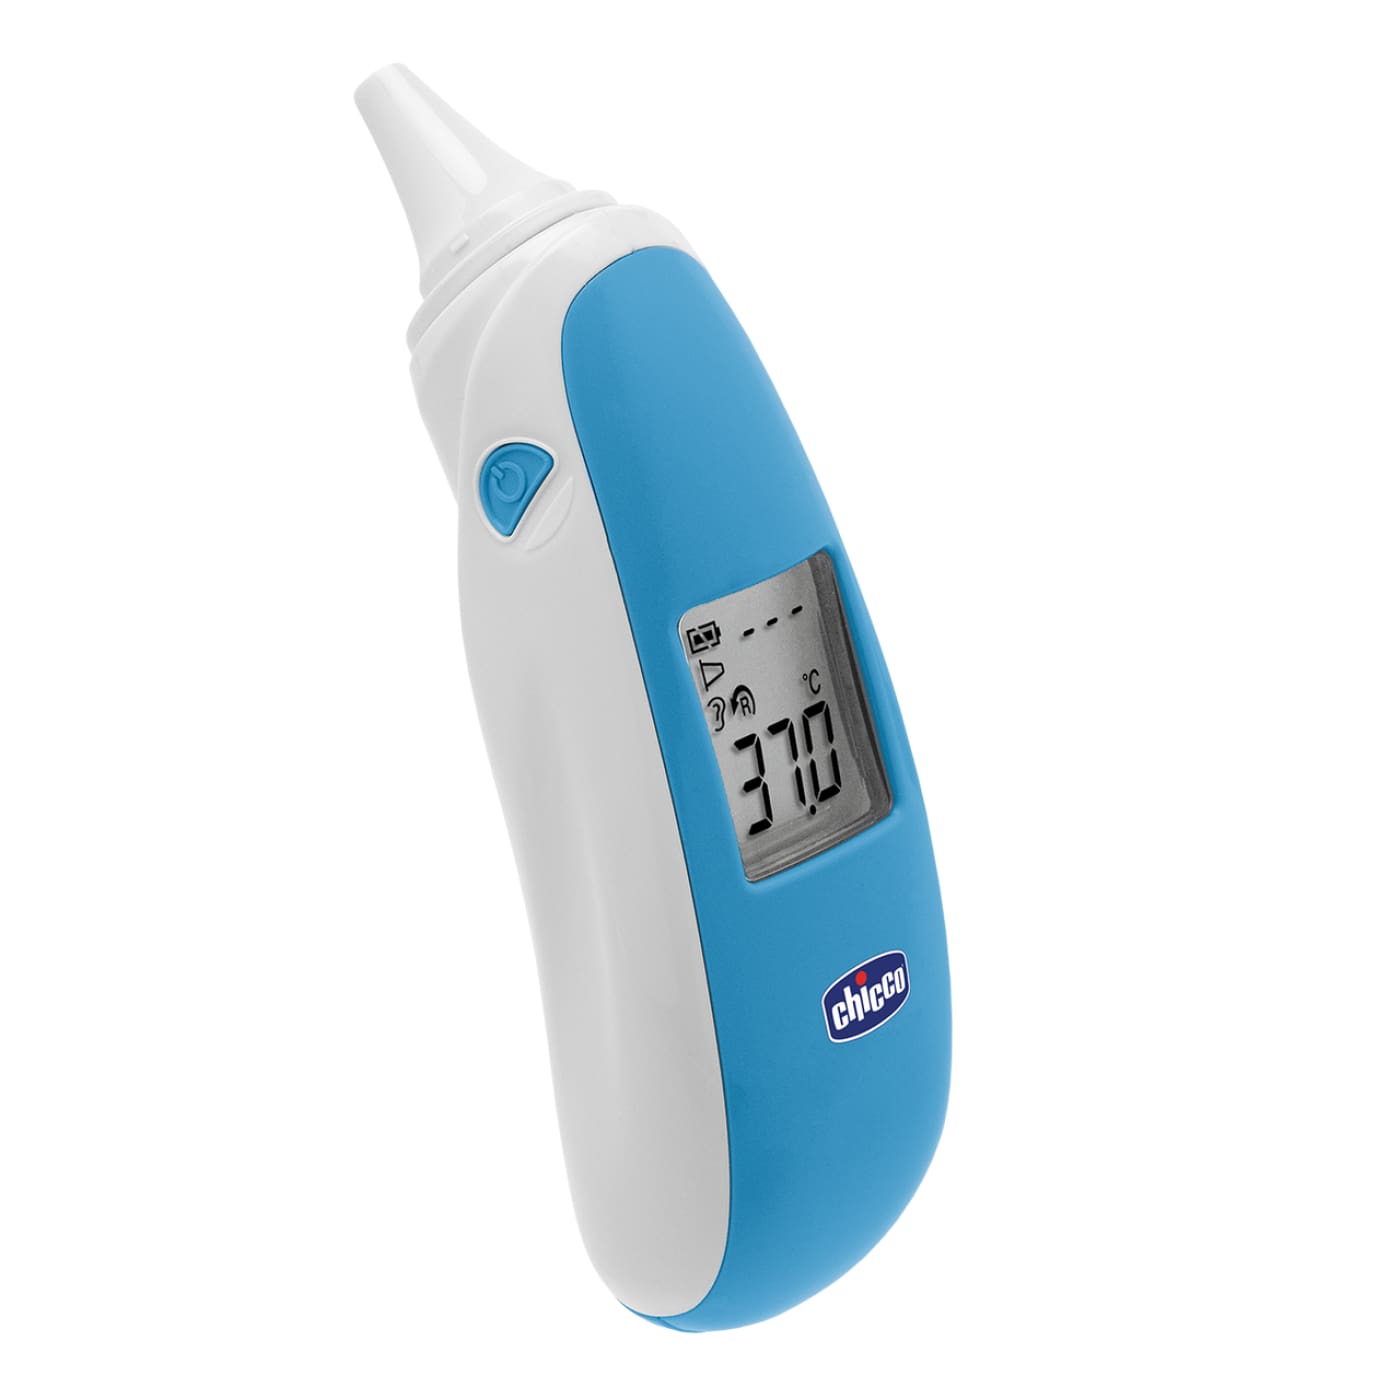 Chicco Comfort Quick Ear Thermometer - HEALTH & HOME SAFETY - THERMOMETERS/MEDICINAL